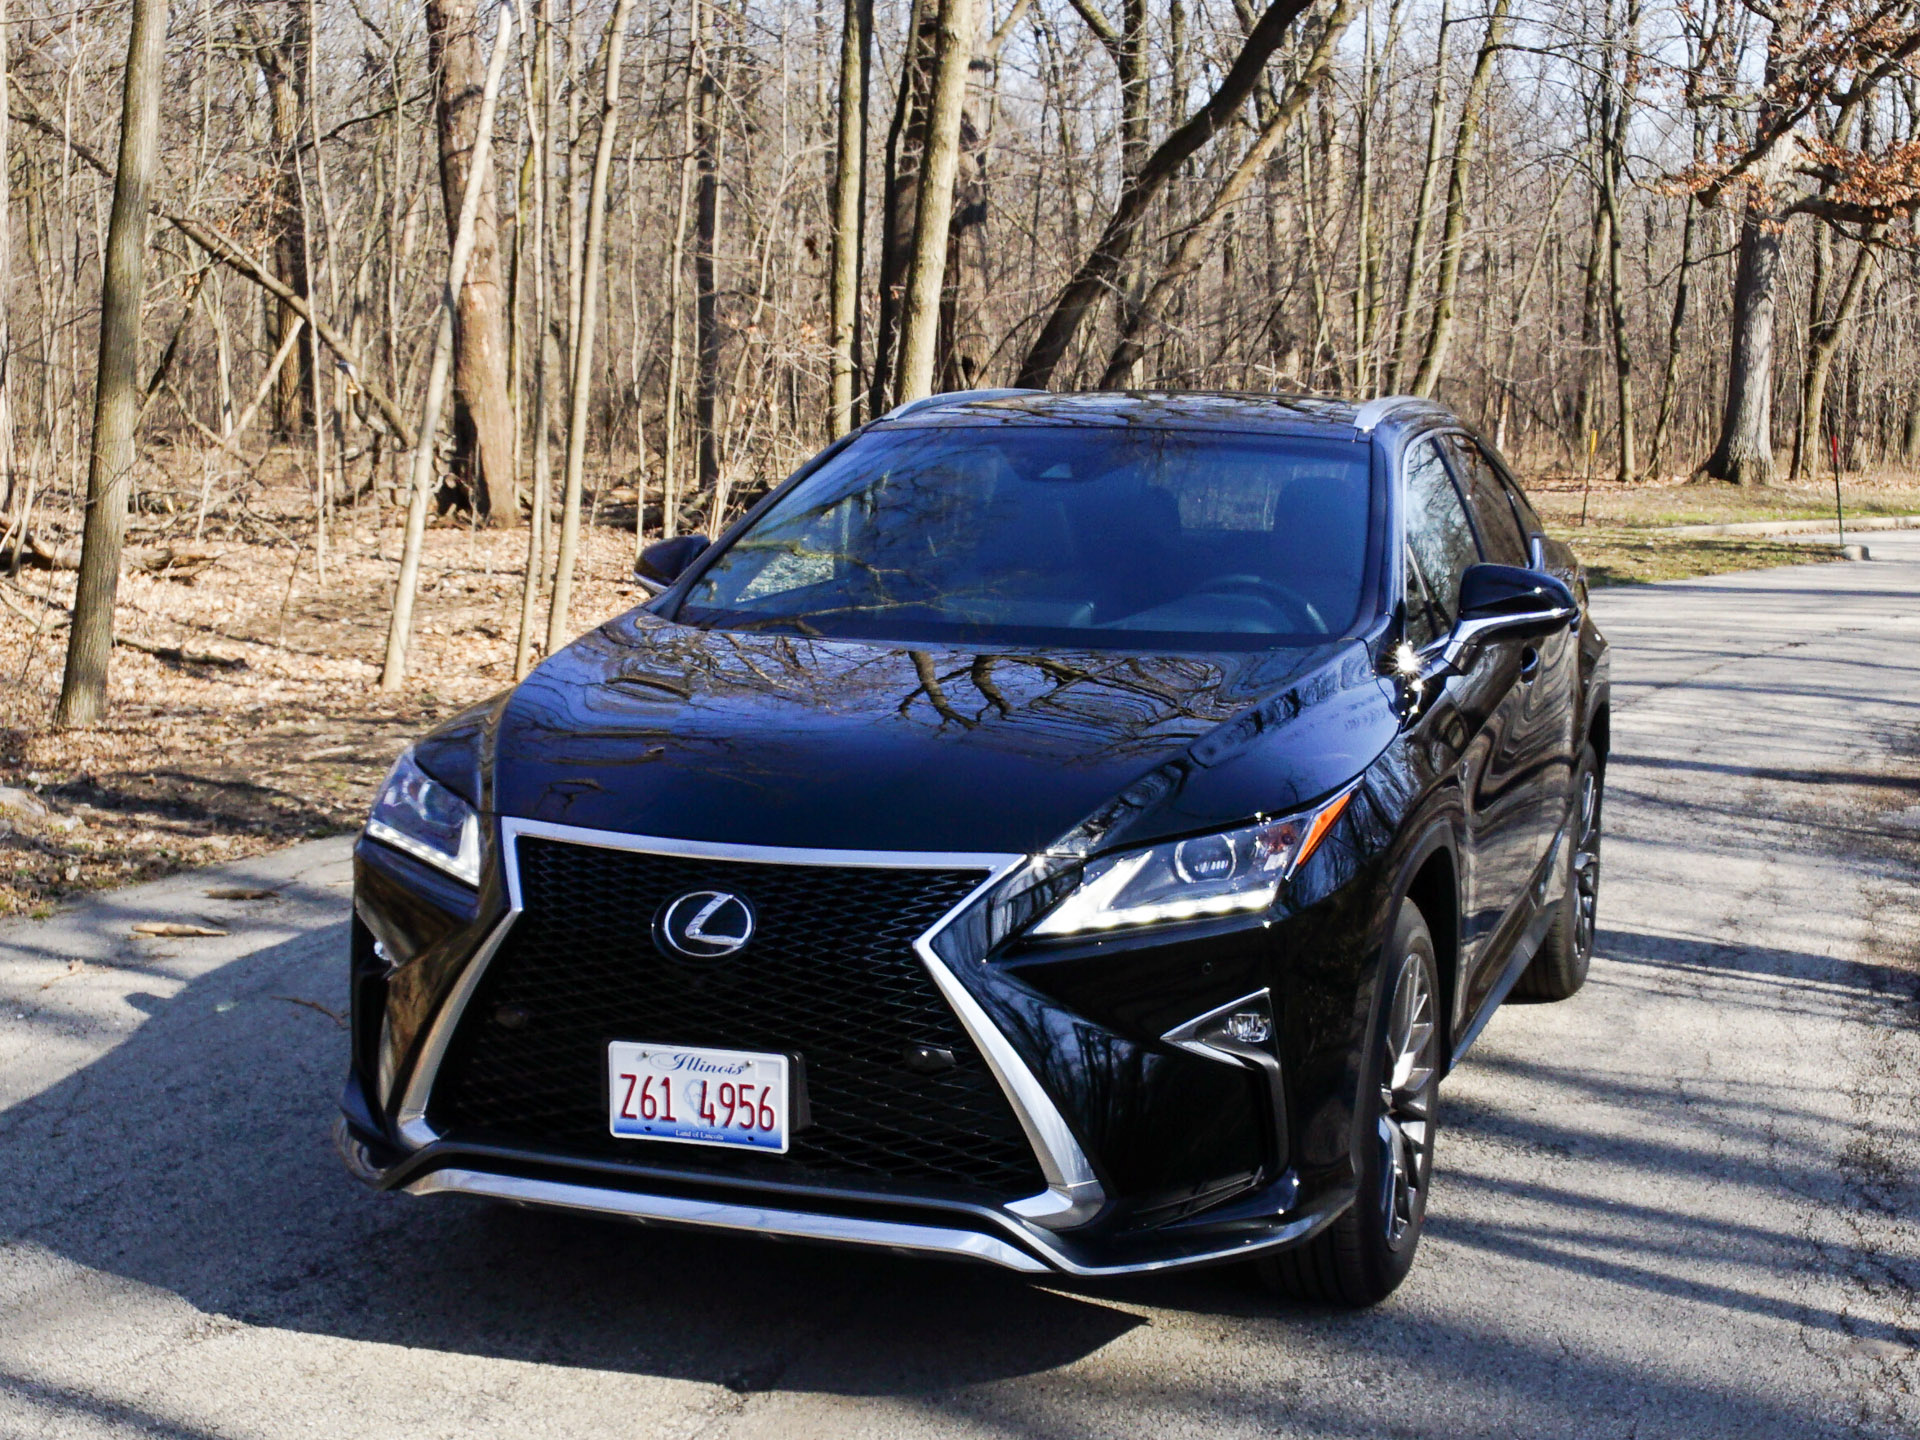 Review 2016 Lexus RX 350 F Sport AWD The Thrill of Driving